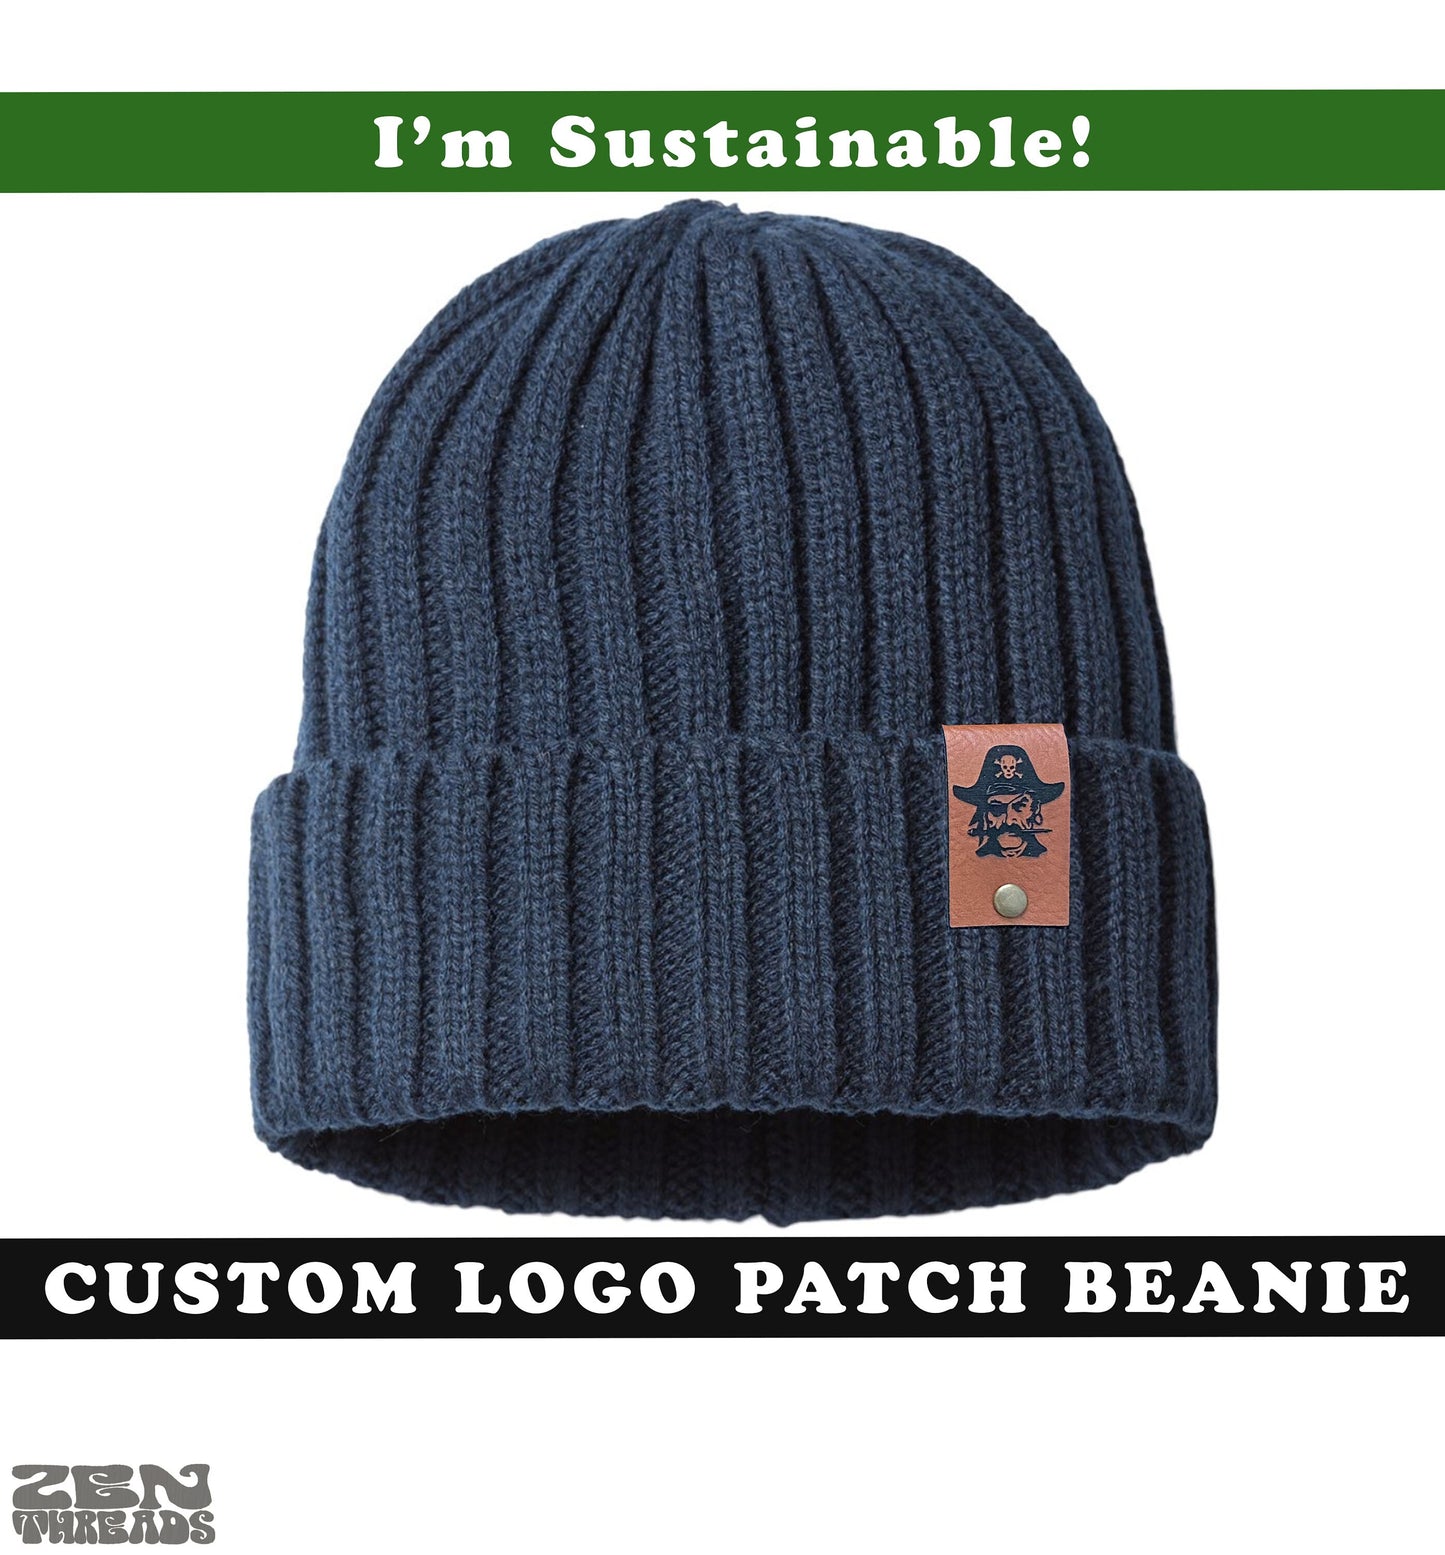 Sustainable CUSTOM PATCH Beanie Leather leatherette vegan laser engraved customized initials personalized hat logo business swag tag hat